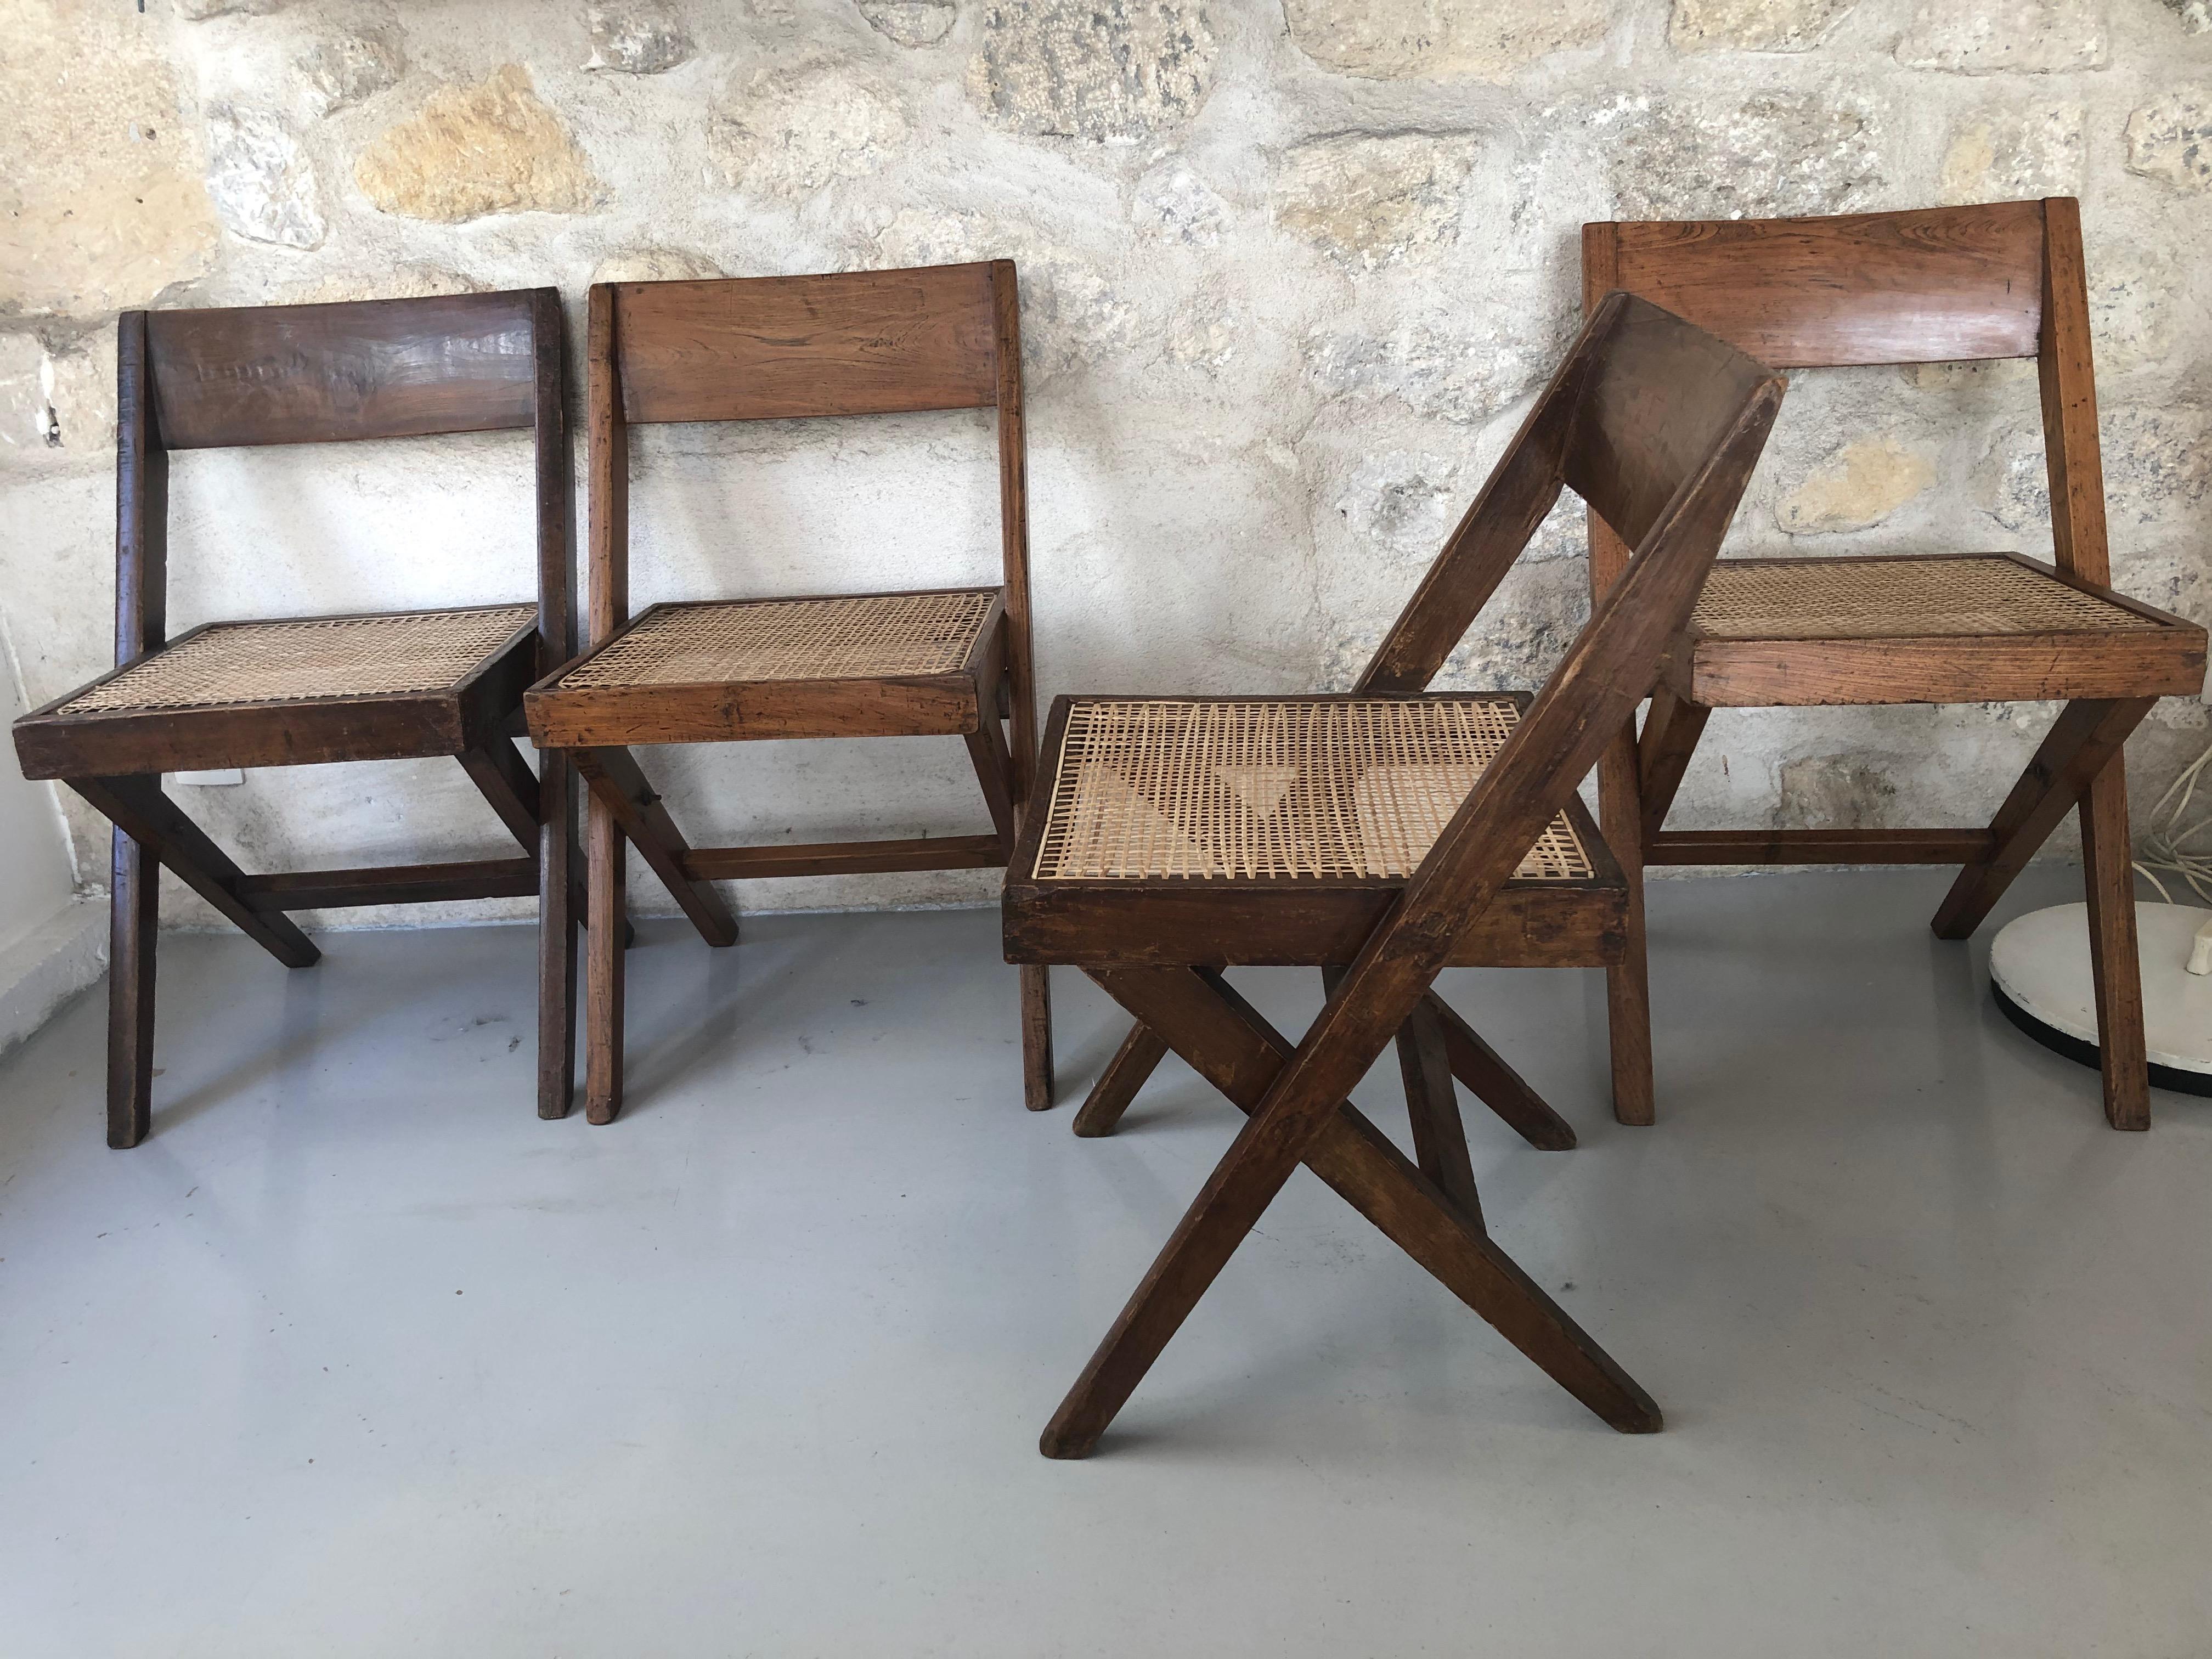 Set of 4 chairs «Library» by Pierre Jeanneret made for the Central Library of Punjab University in Chandigarh.
Solid teak chair with cane seat.